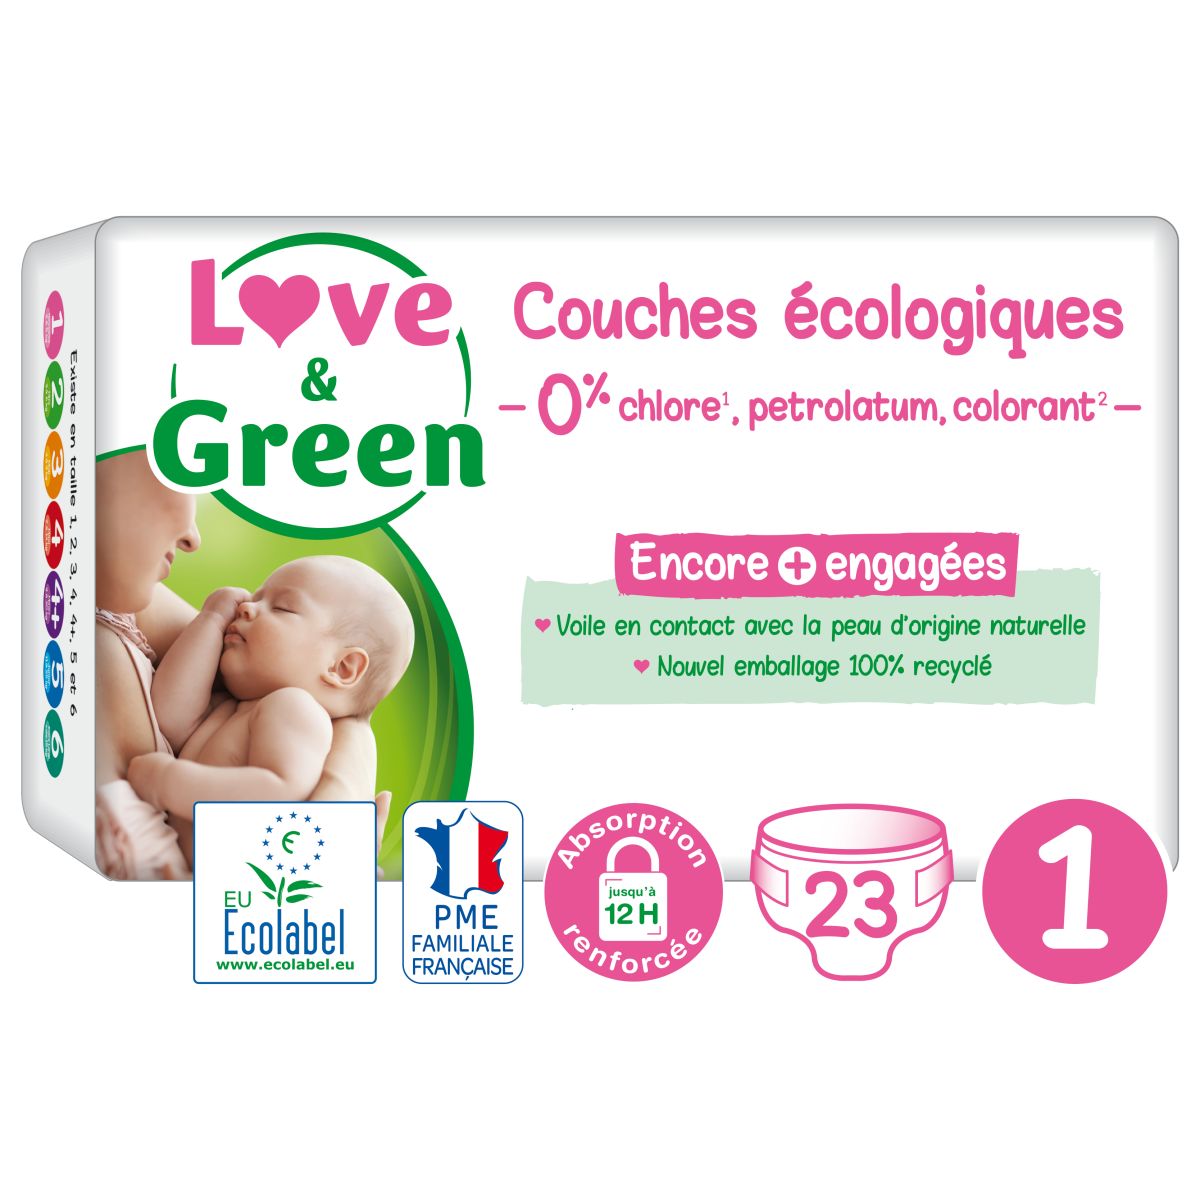 Couches taille 1 - Nappies